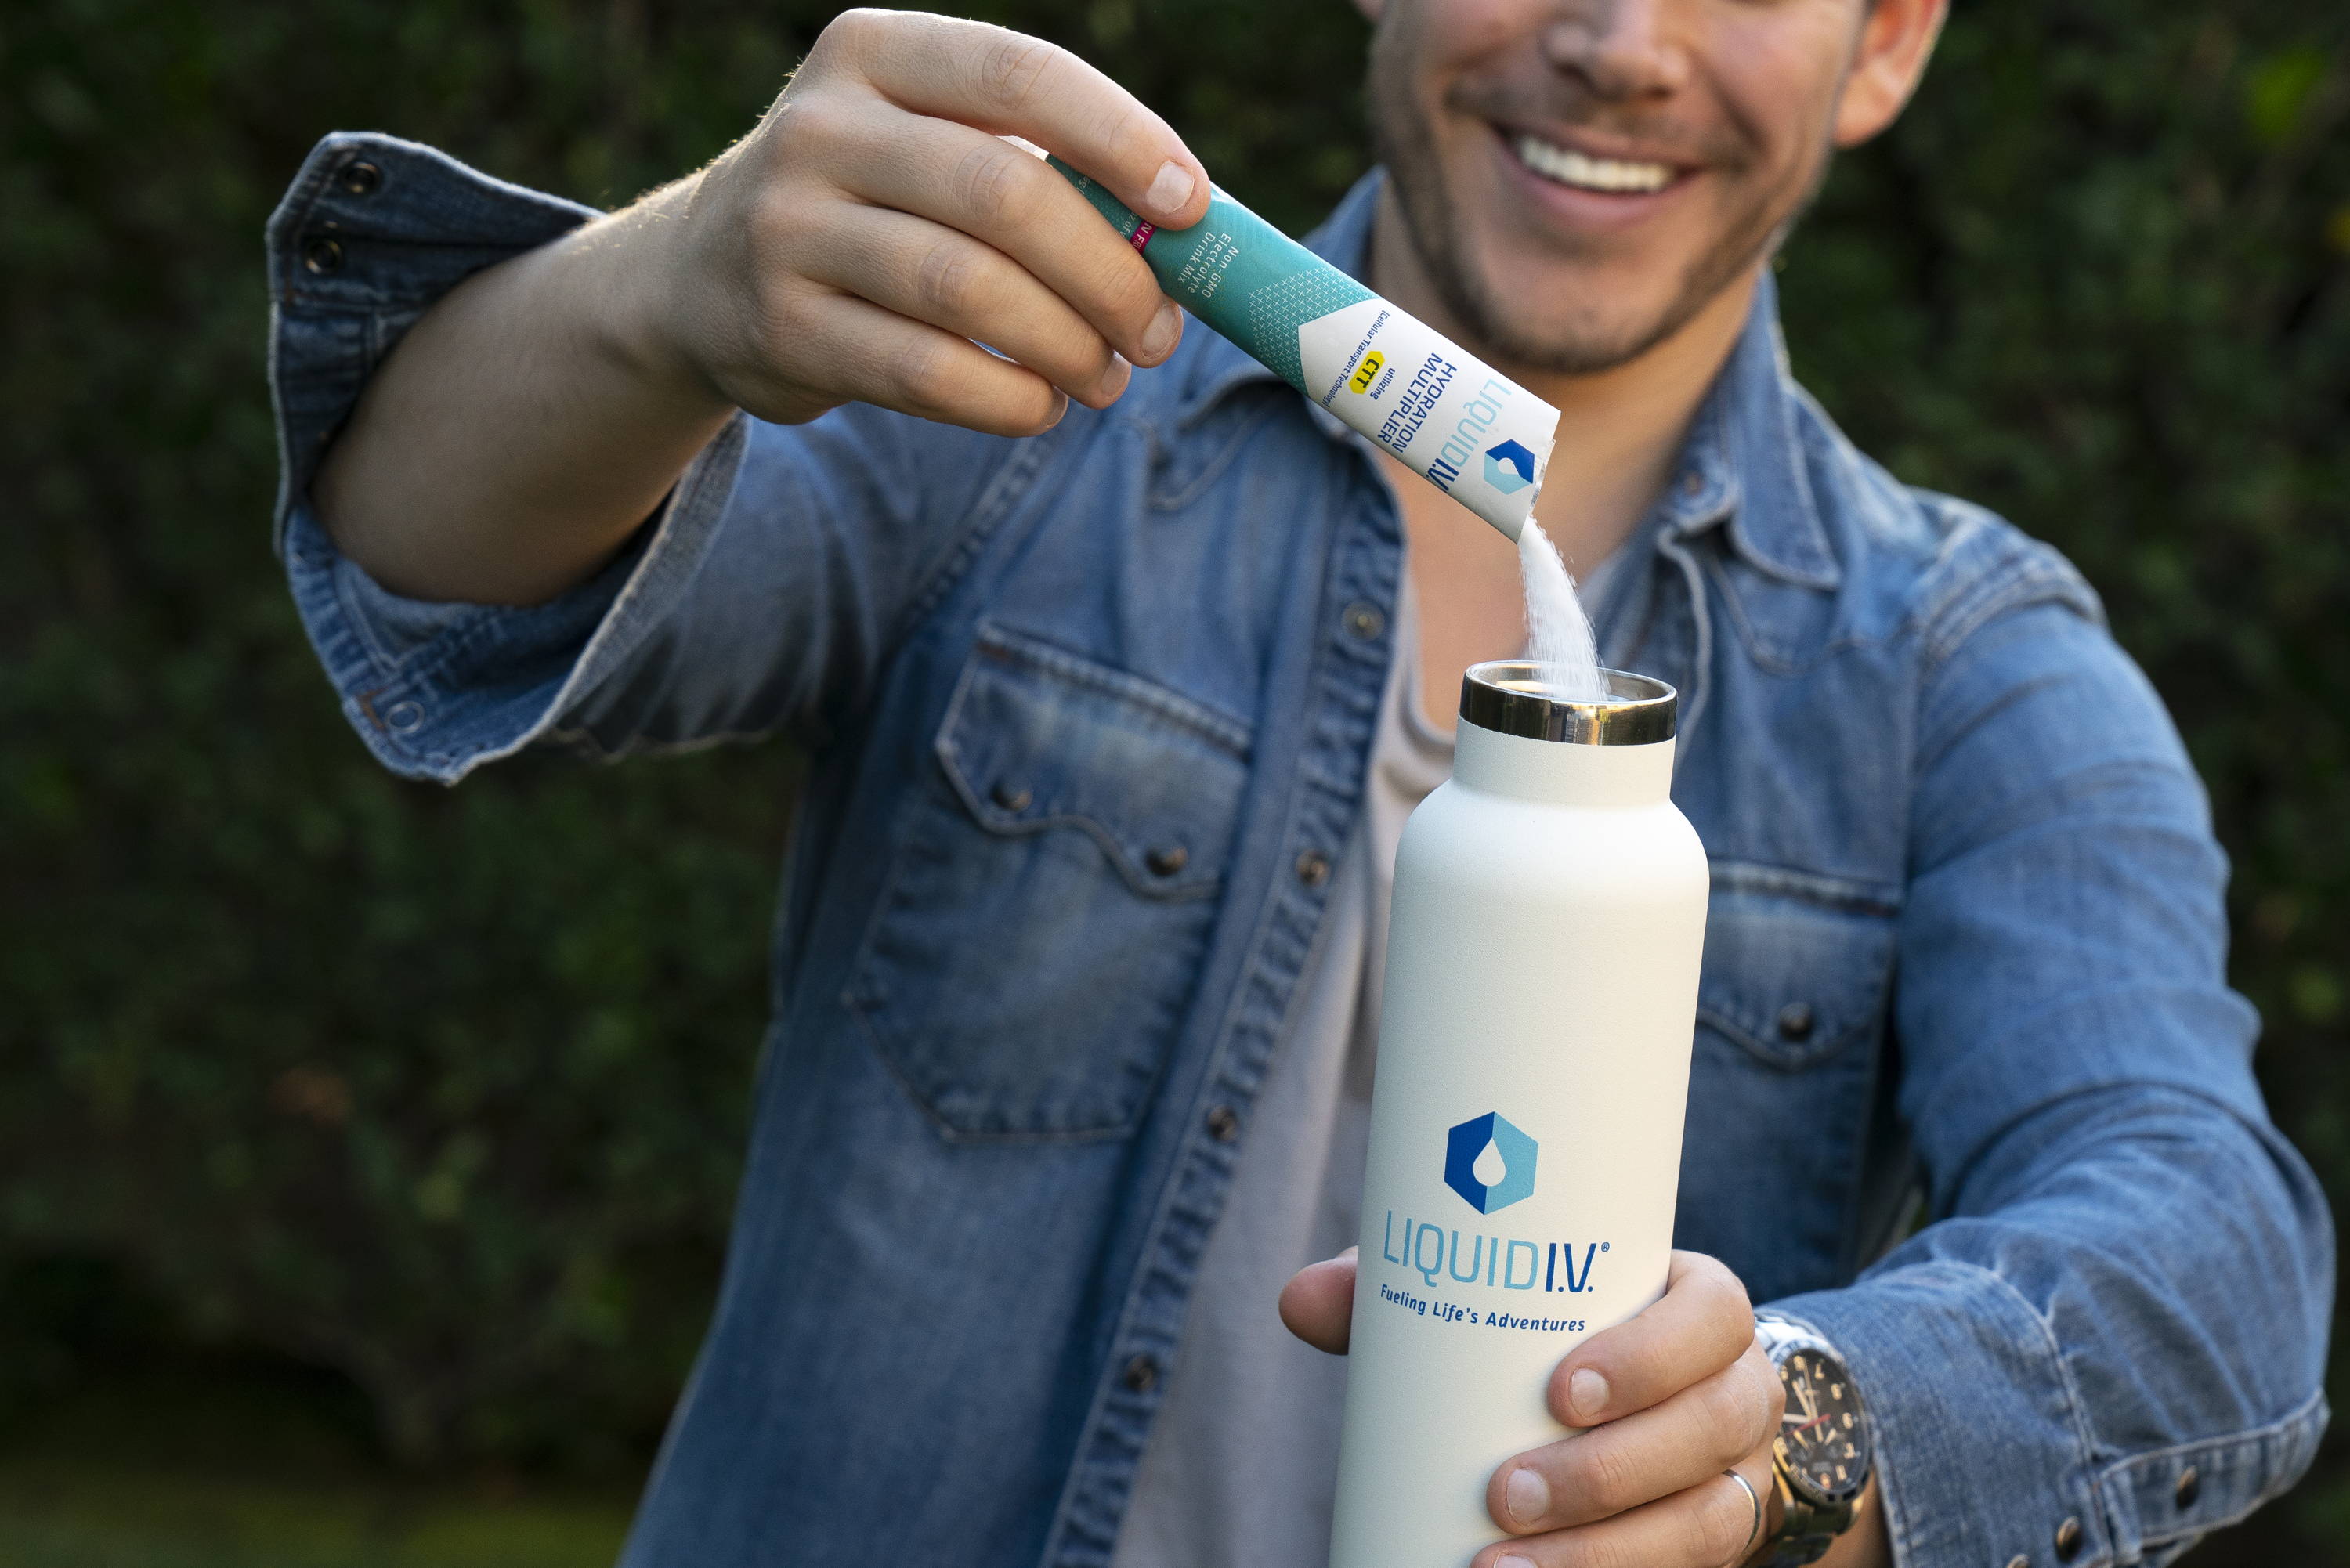 A frequent user of oral rehydration solutions pours Liquid IV's electrolyte powder into a white bottle, smiling in the background.